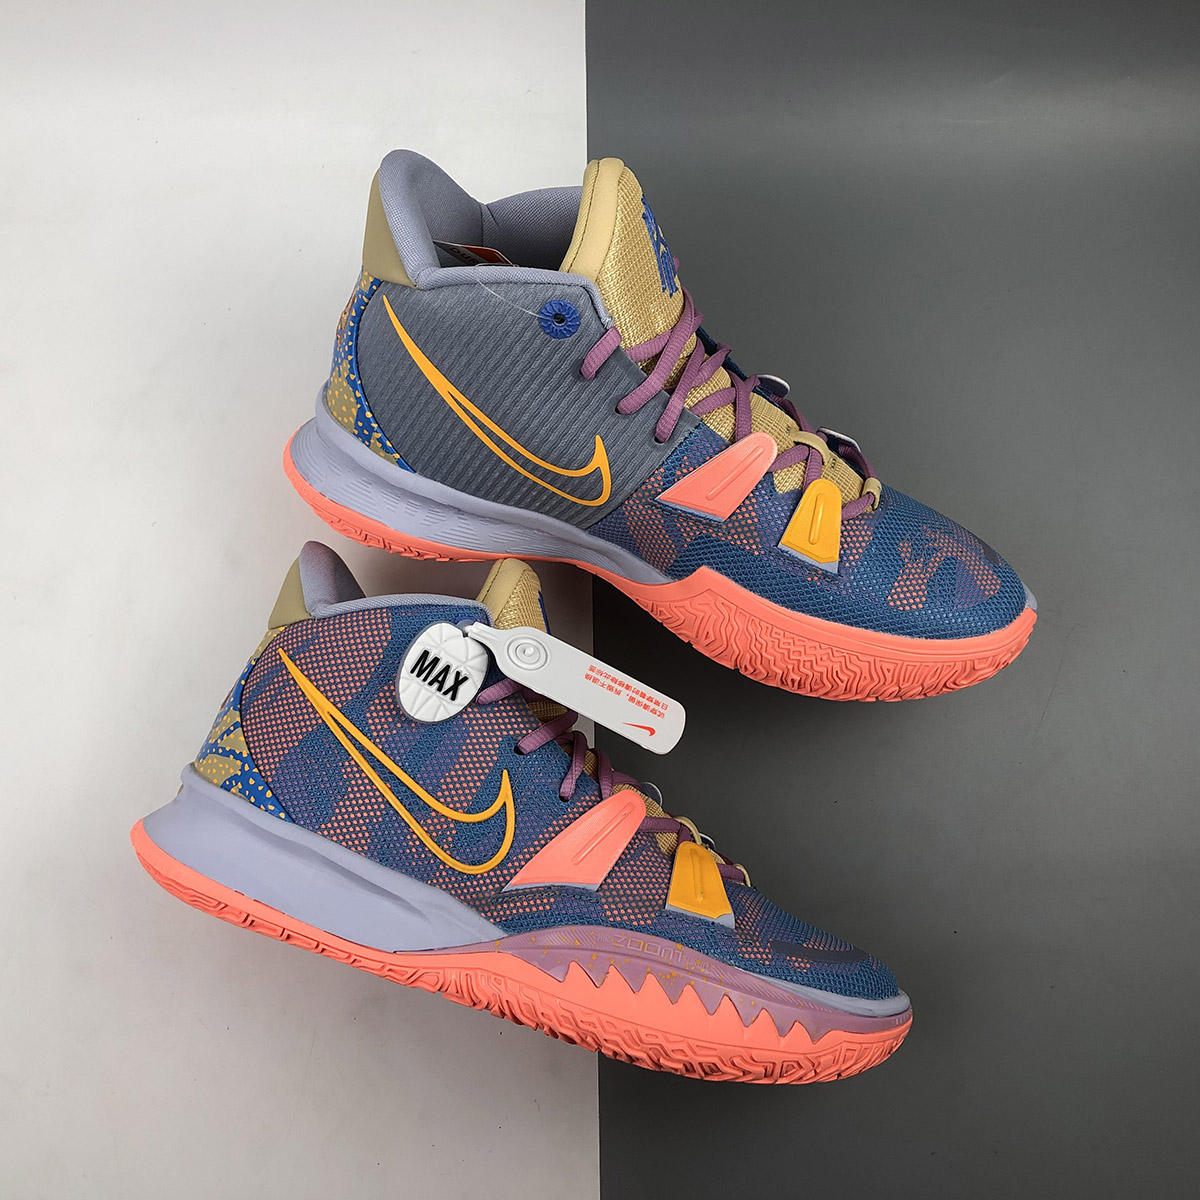 Nike Kyrie 7 “Expressions” For Sale – The Sole Line